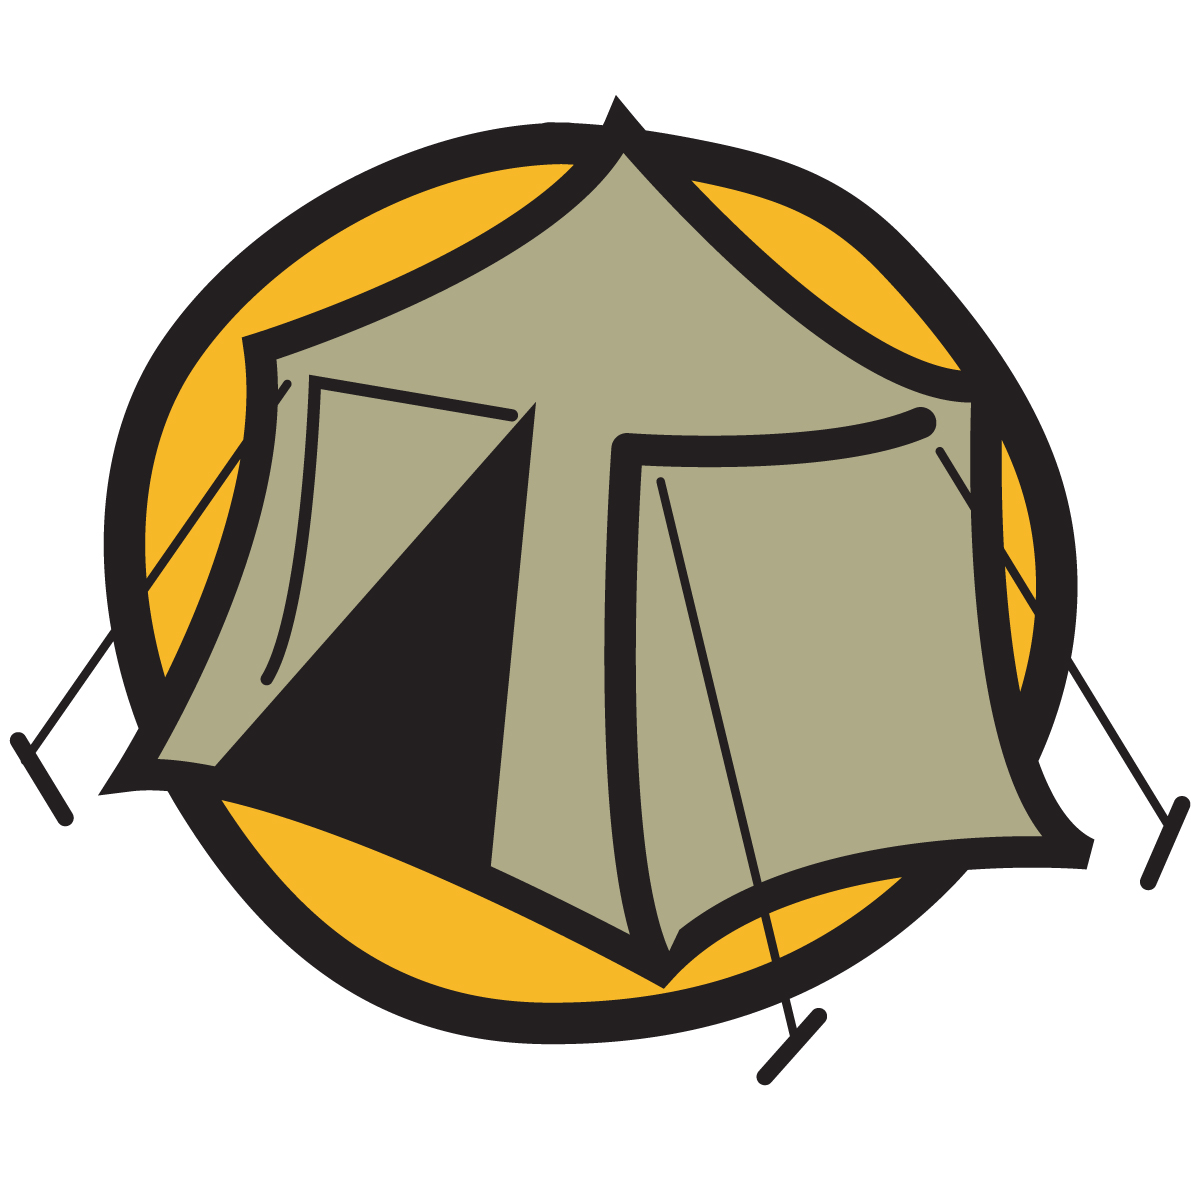 Cartoon Campfire And Tent | Clipart library - Free Clipart Images